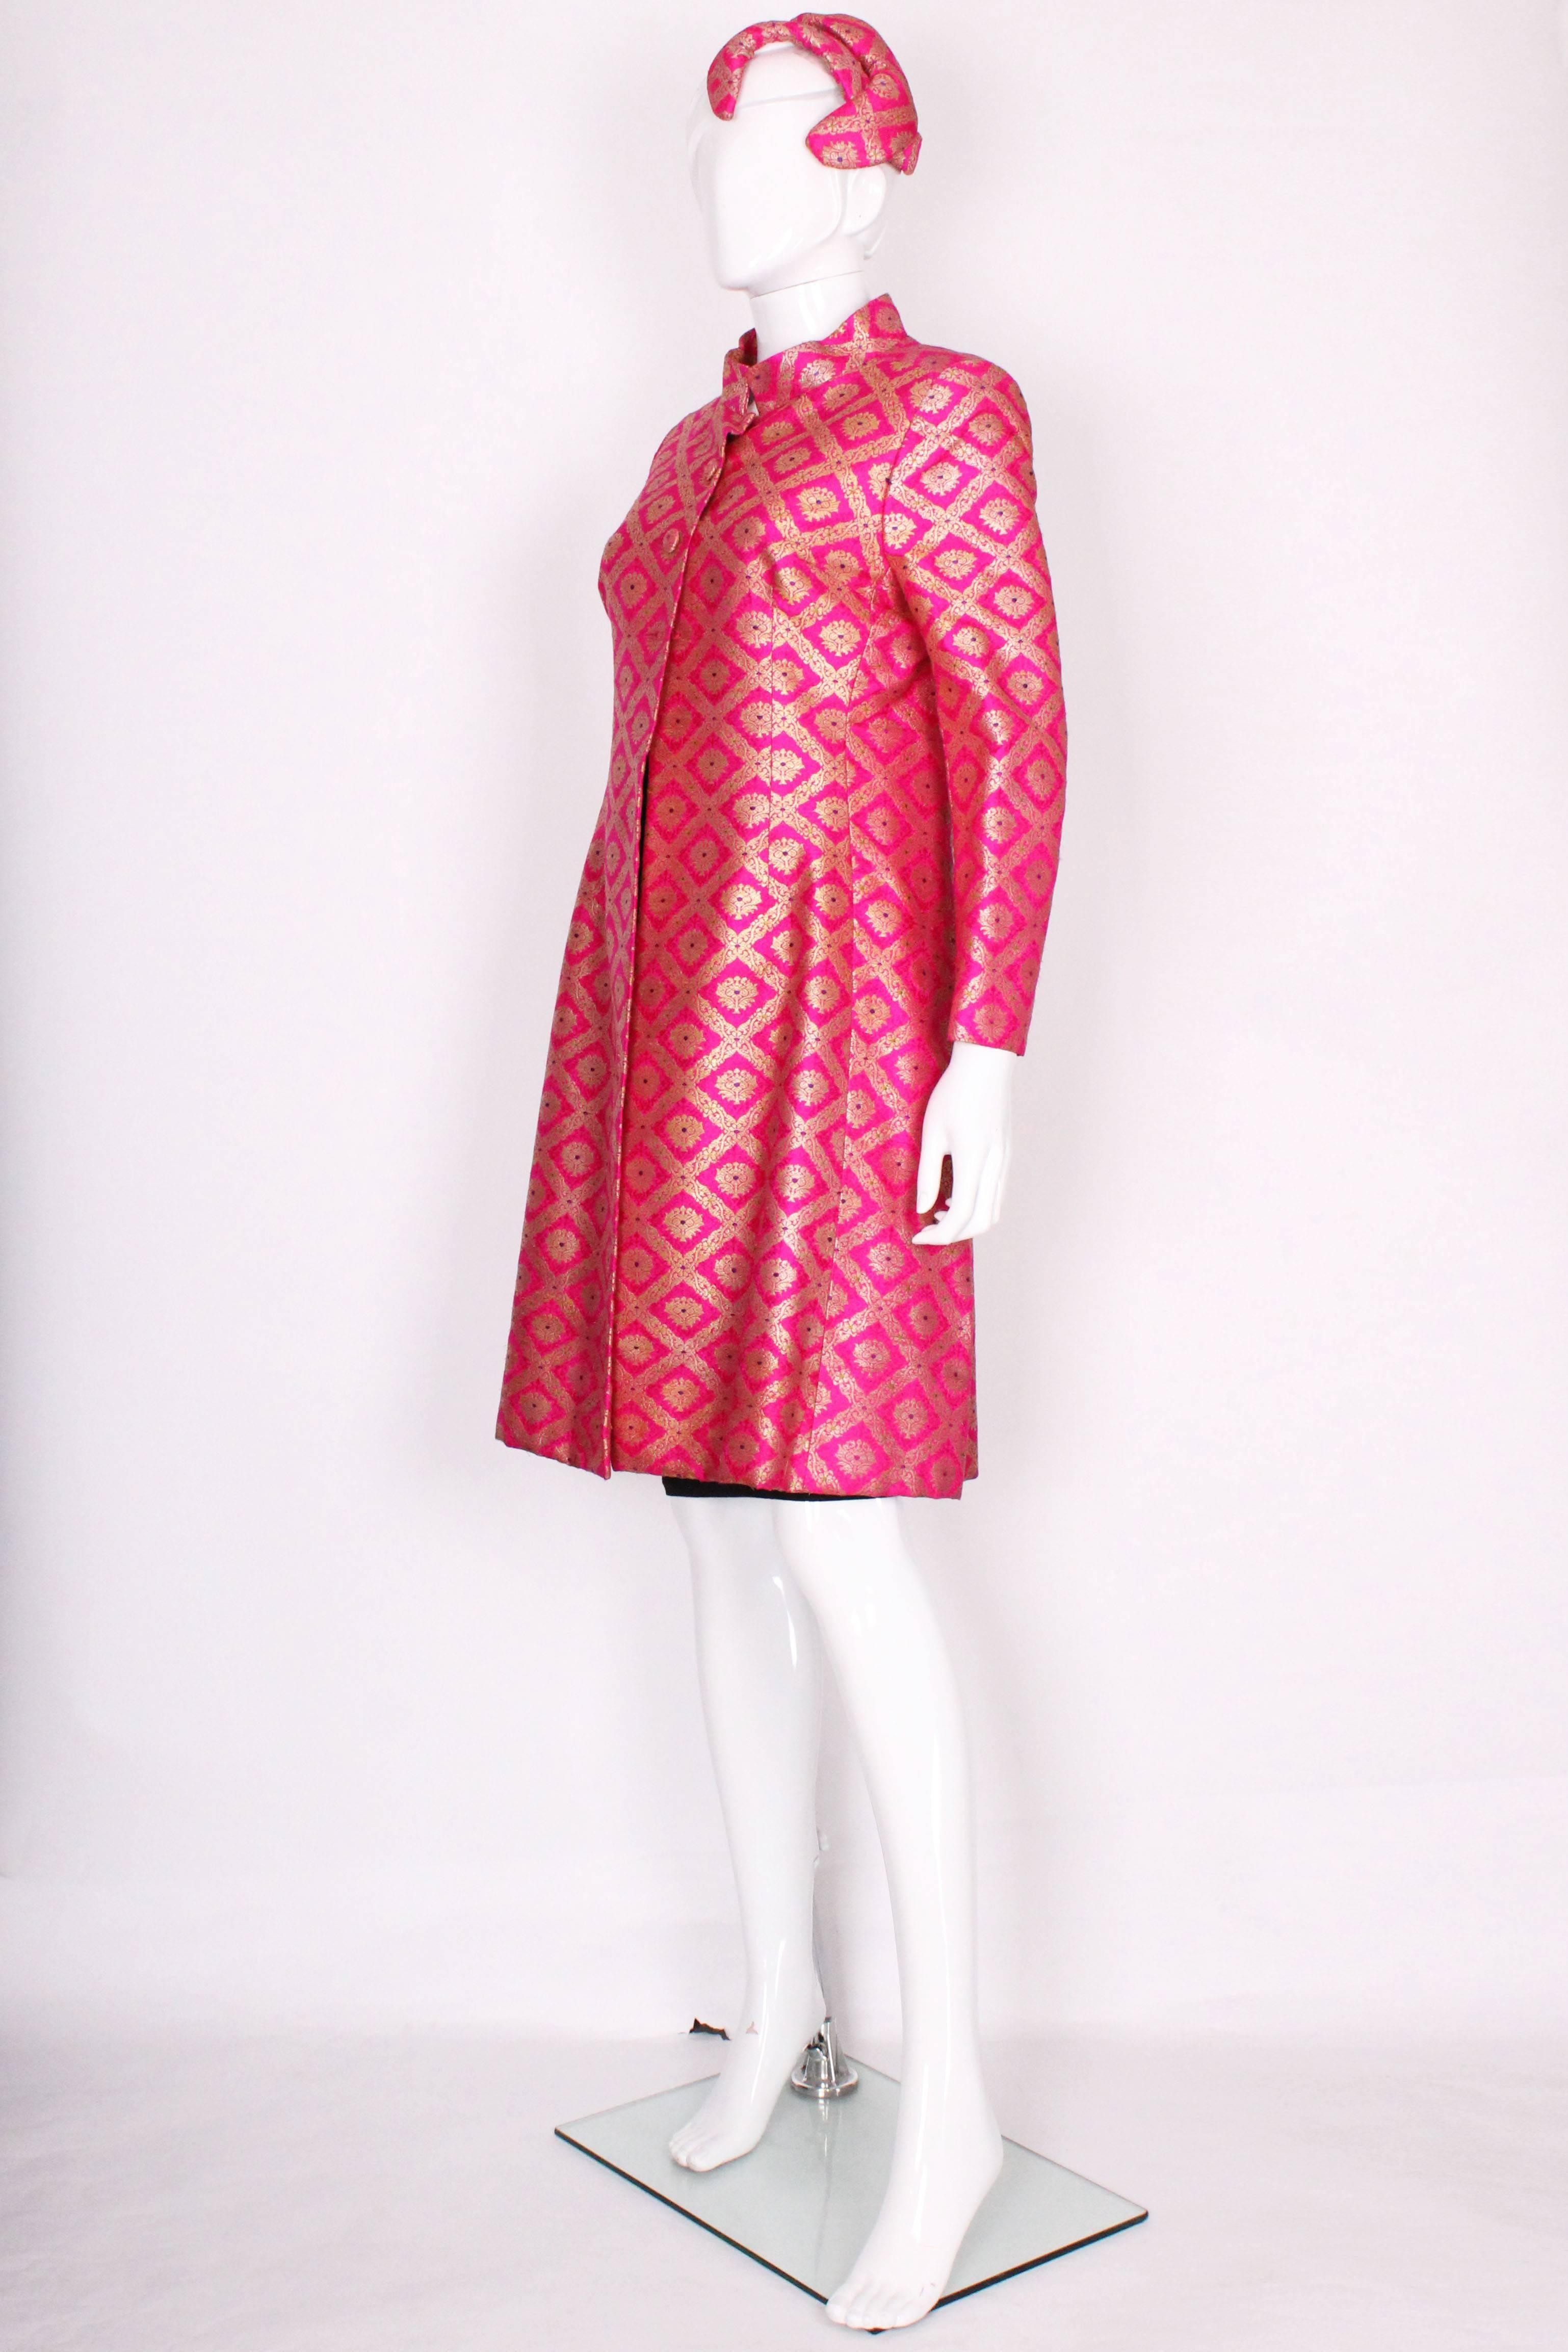 Women's 1960s Indian Silk Patterned Pink and Gold Coat & Headpiece